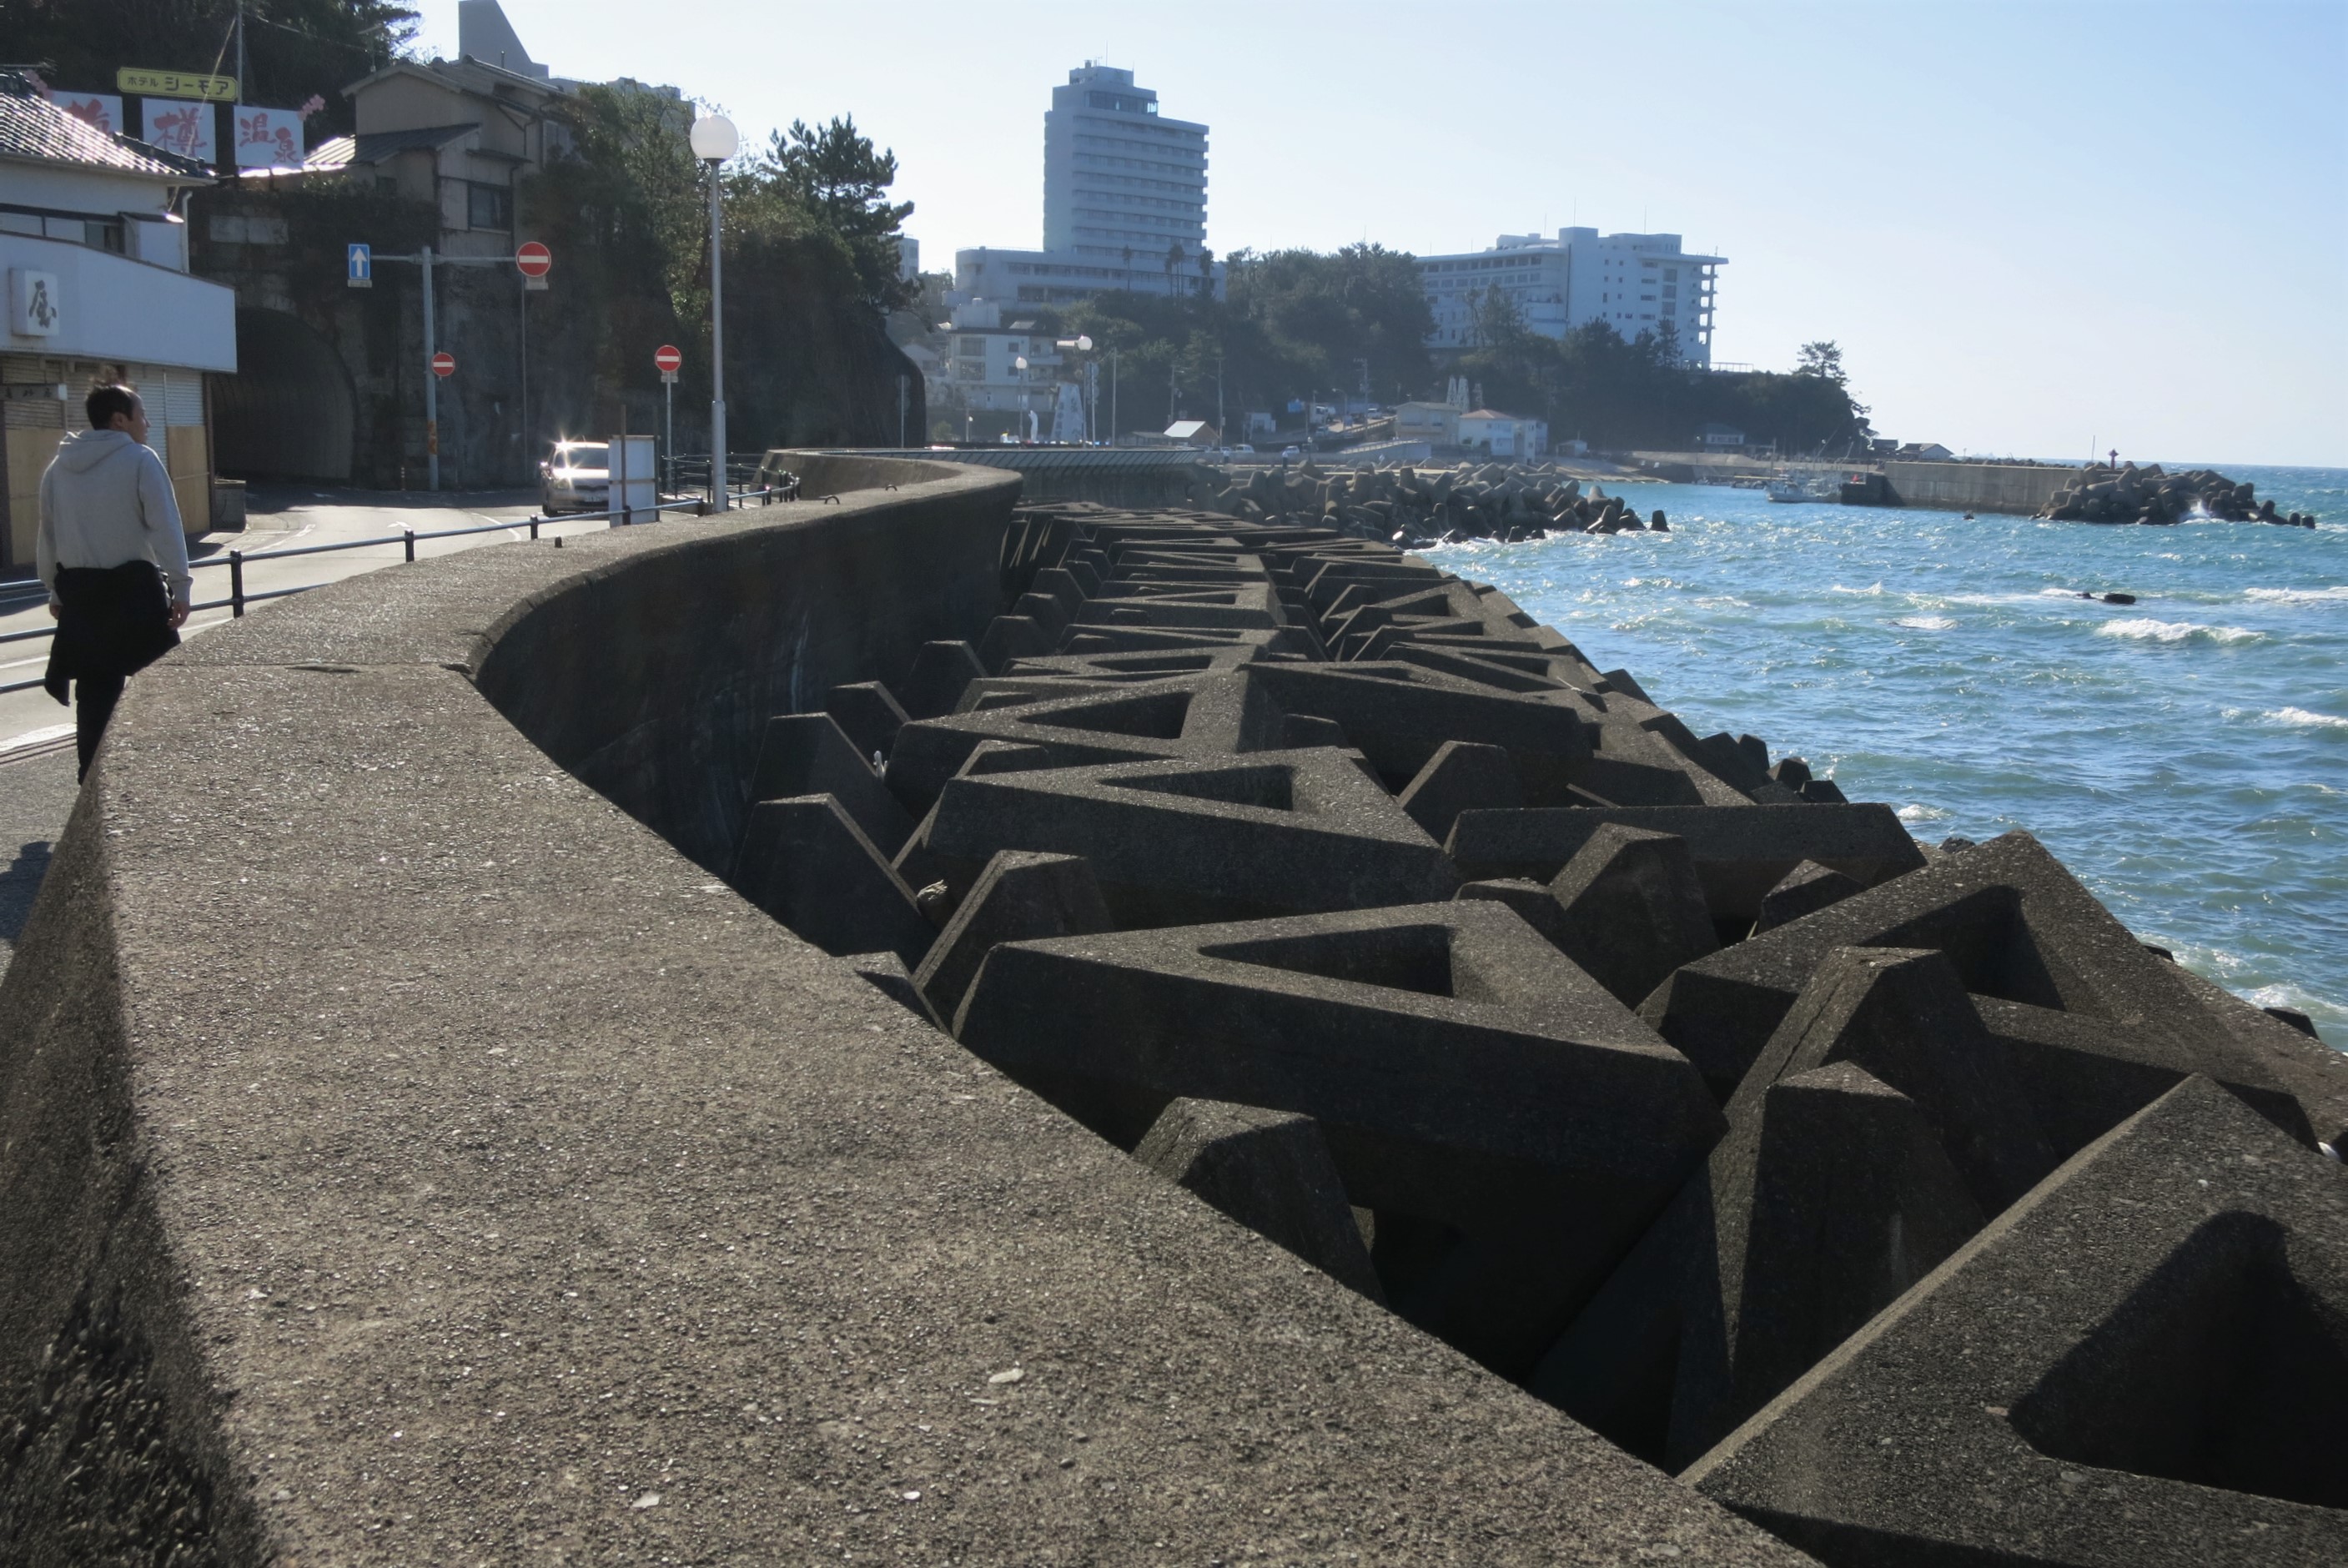 Seawalls, as pictured above, can effectively protect against tsunamis and coastal flooding (Source: Wikimedia Commons)